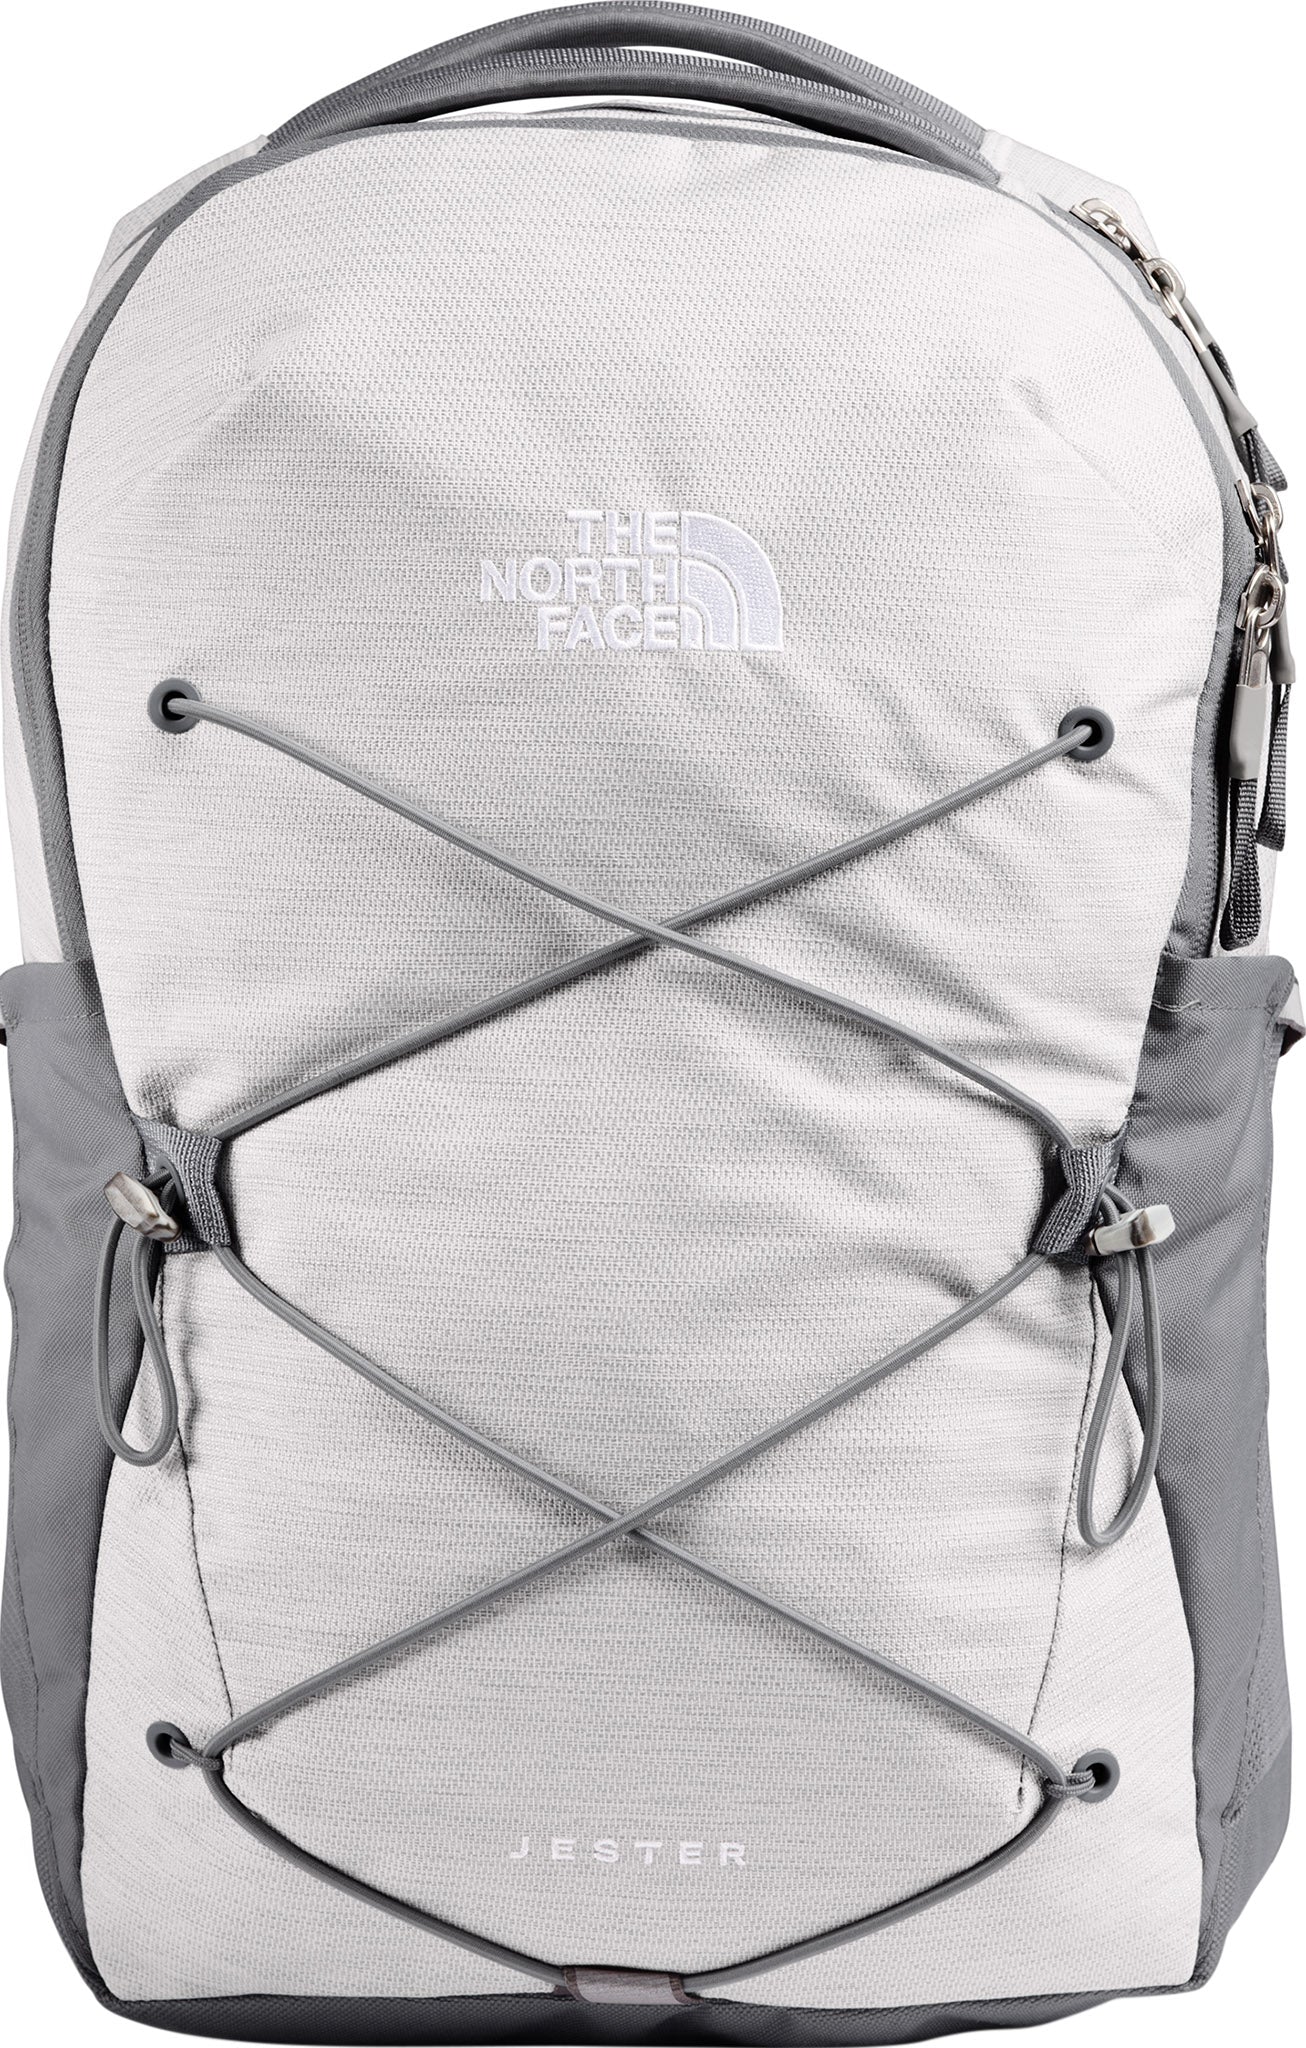 The North Face Jester Backpack - 27L - Women's | Altitude Sports